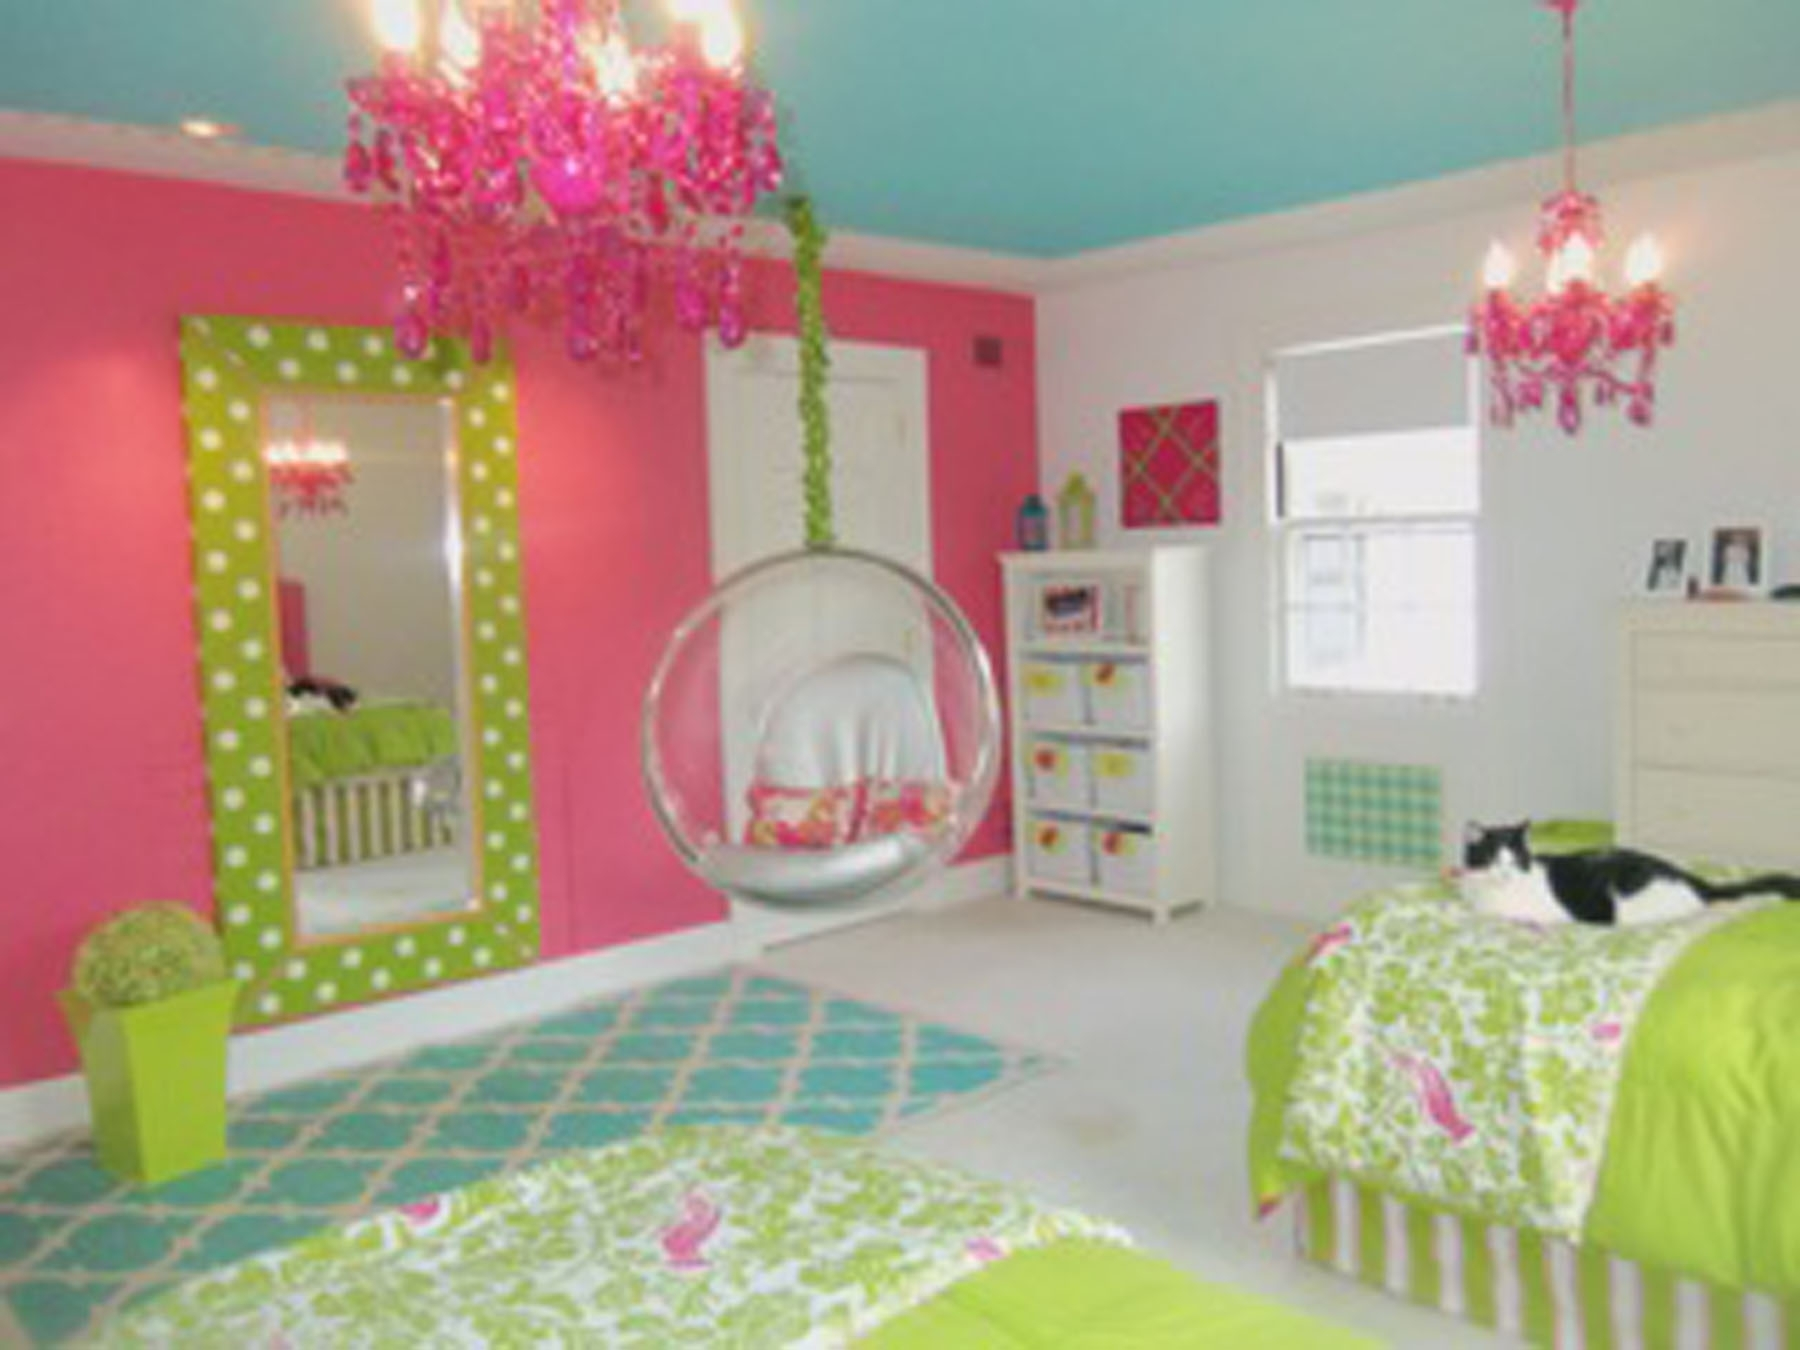 Awesome room suggestions for girl kids green loving kids room ideas special feel ideas nautical room ideas